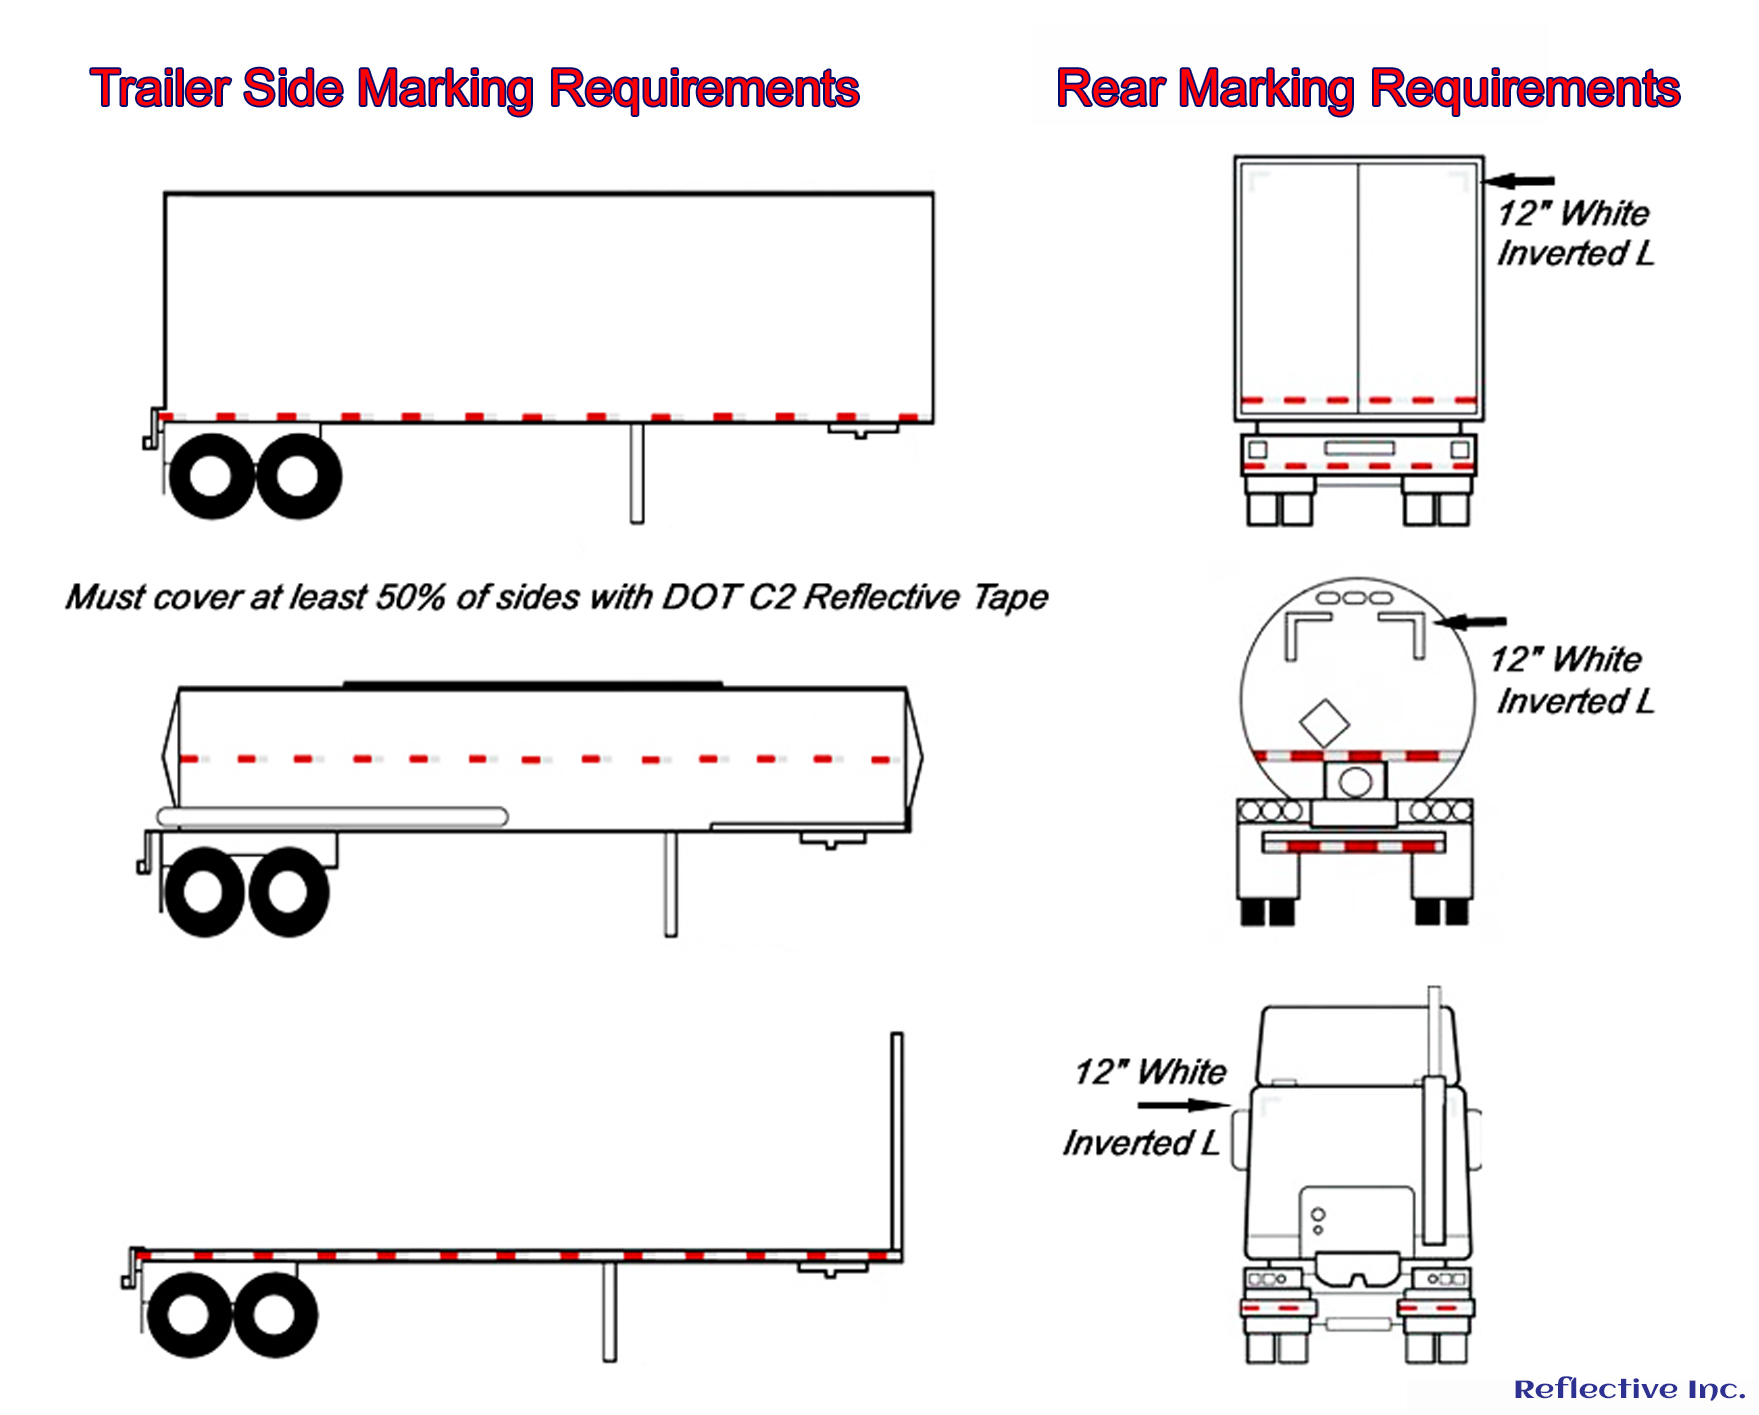 Reflective DOT C2 Tape Application Errors That Can Lead to Truck Accidents